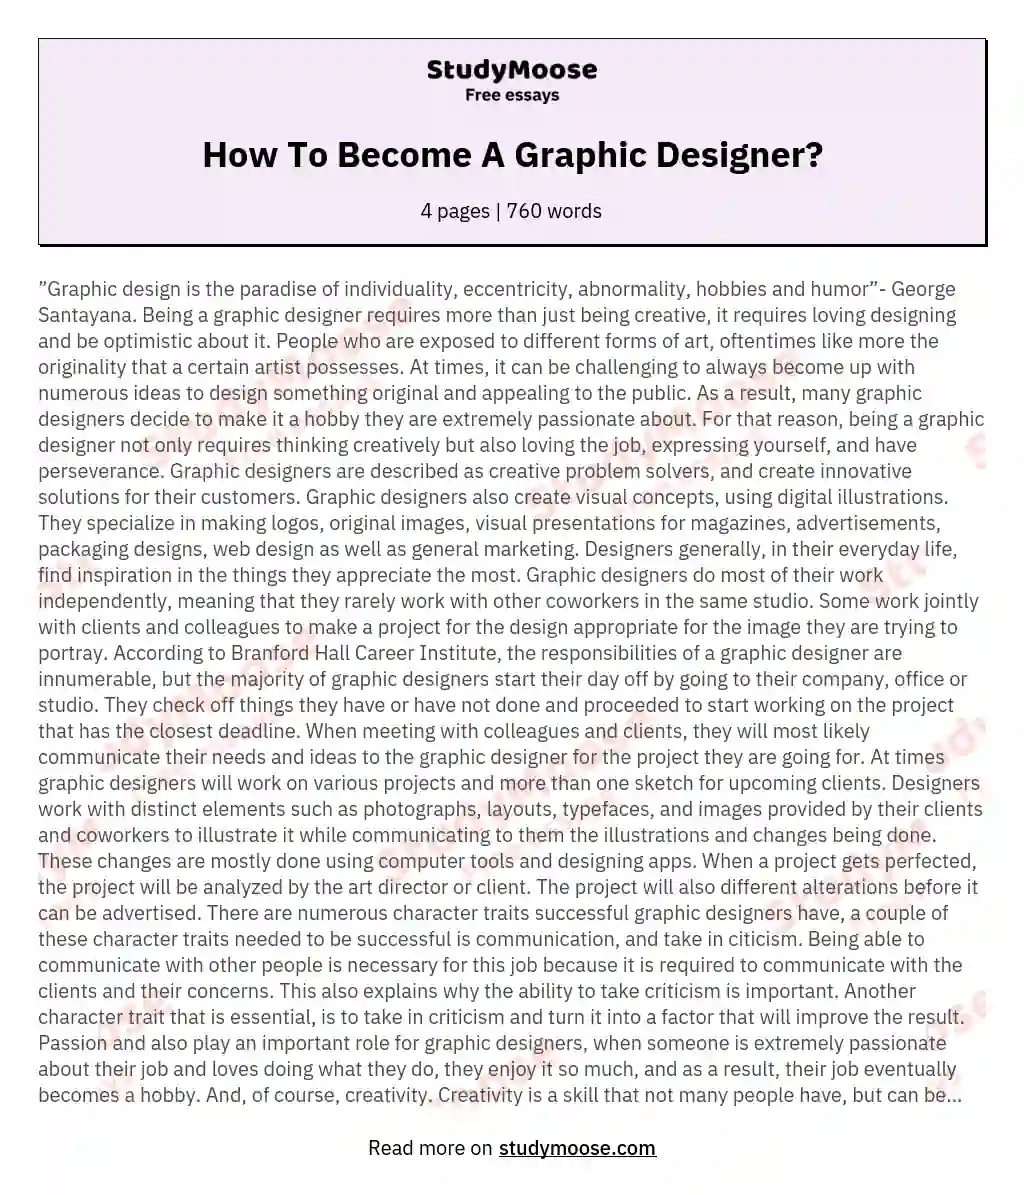 How To Become A Graphic Designer?